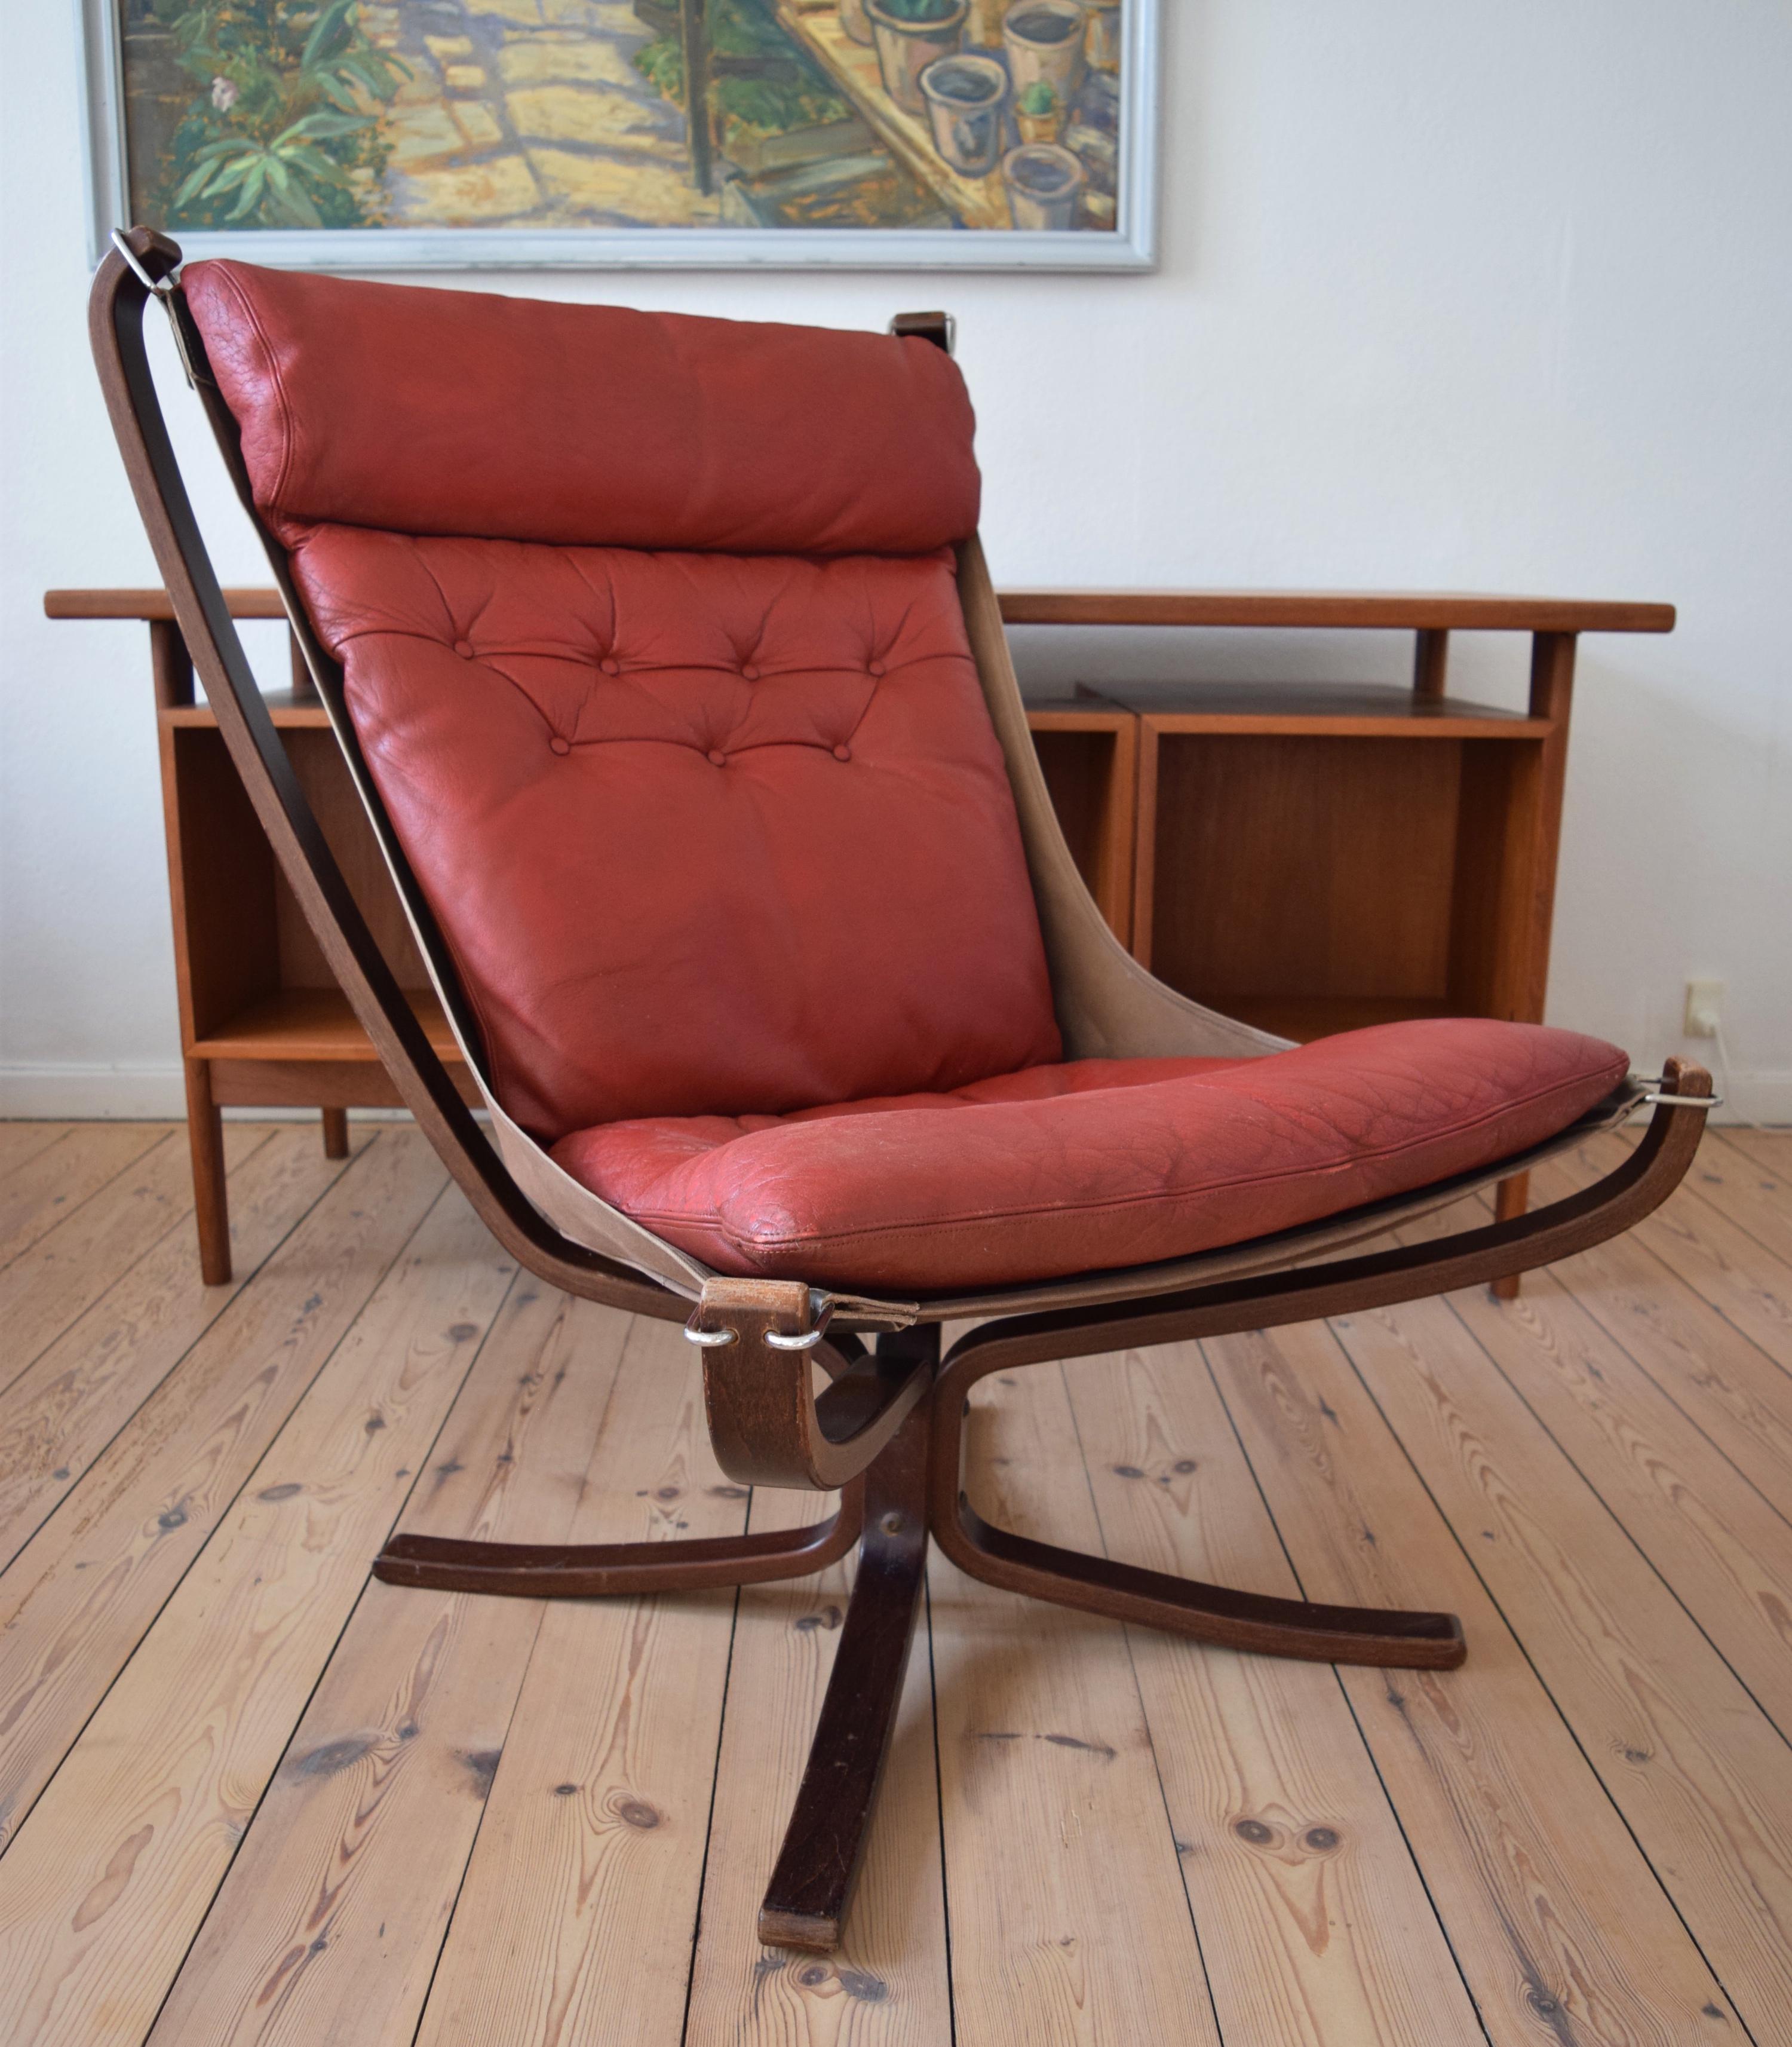 Falcon chair designed by Sigurd Ressel and manufactured by Vatne Møbler in Norway in the 1970s. Features red leather cushion and sits on a canvas hammock. The leather is in great shape and is still soft and supple. All the hooks and canvas on the